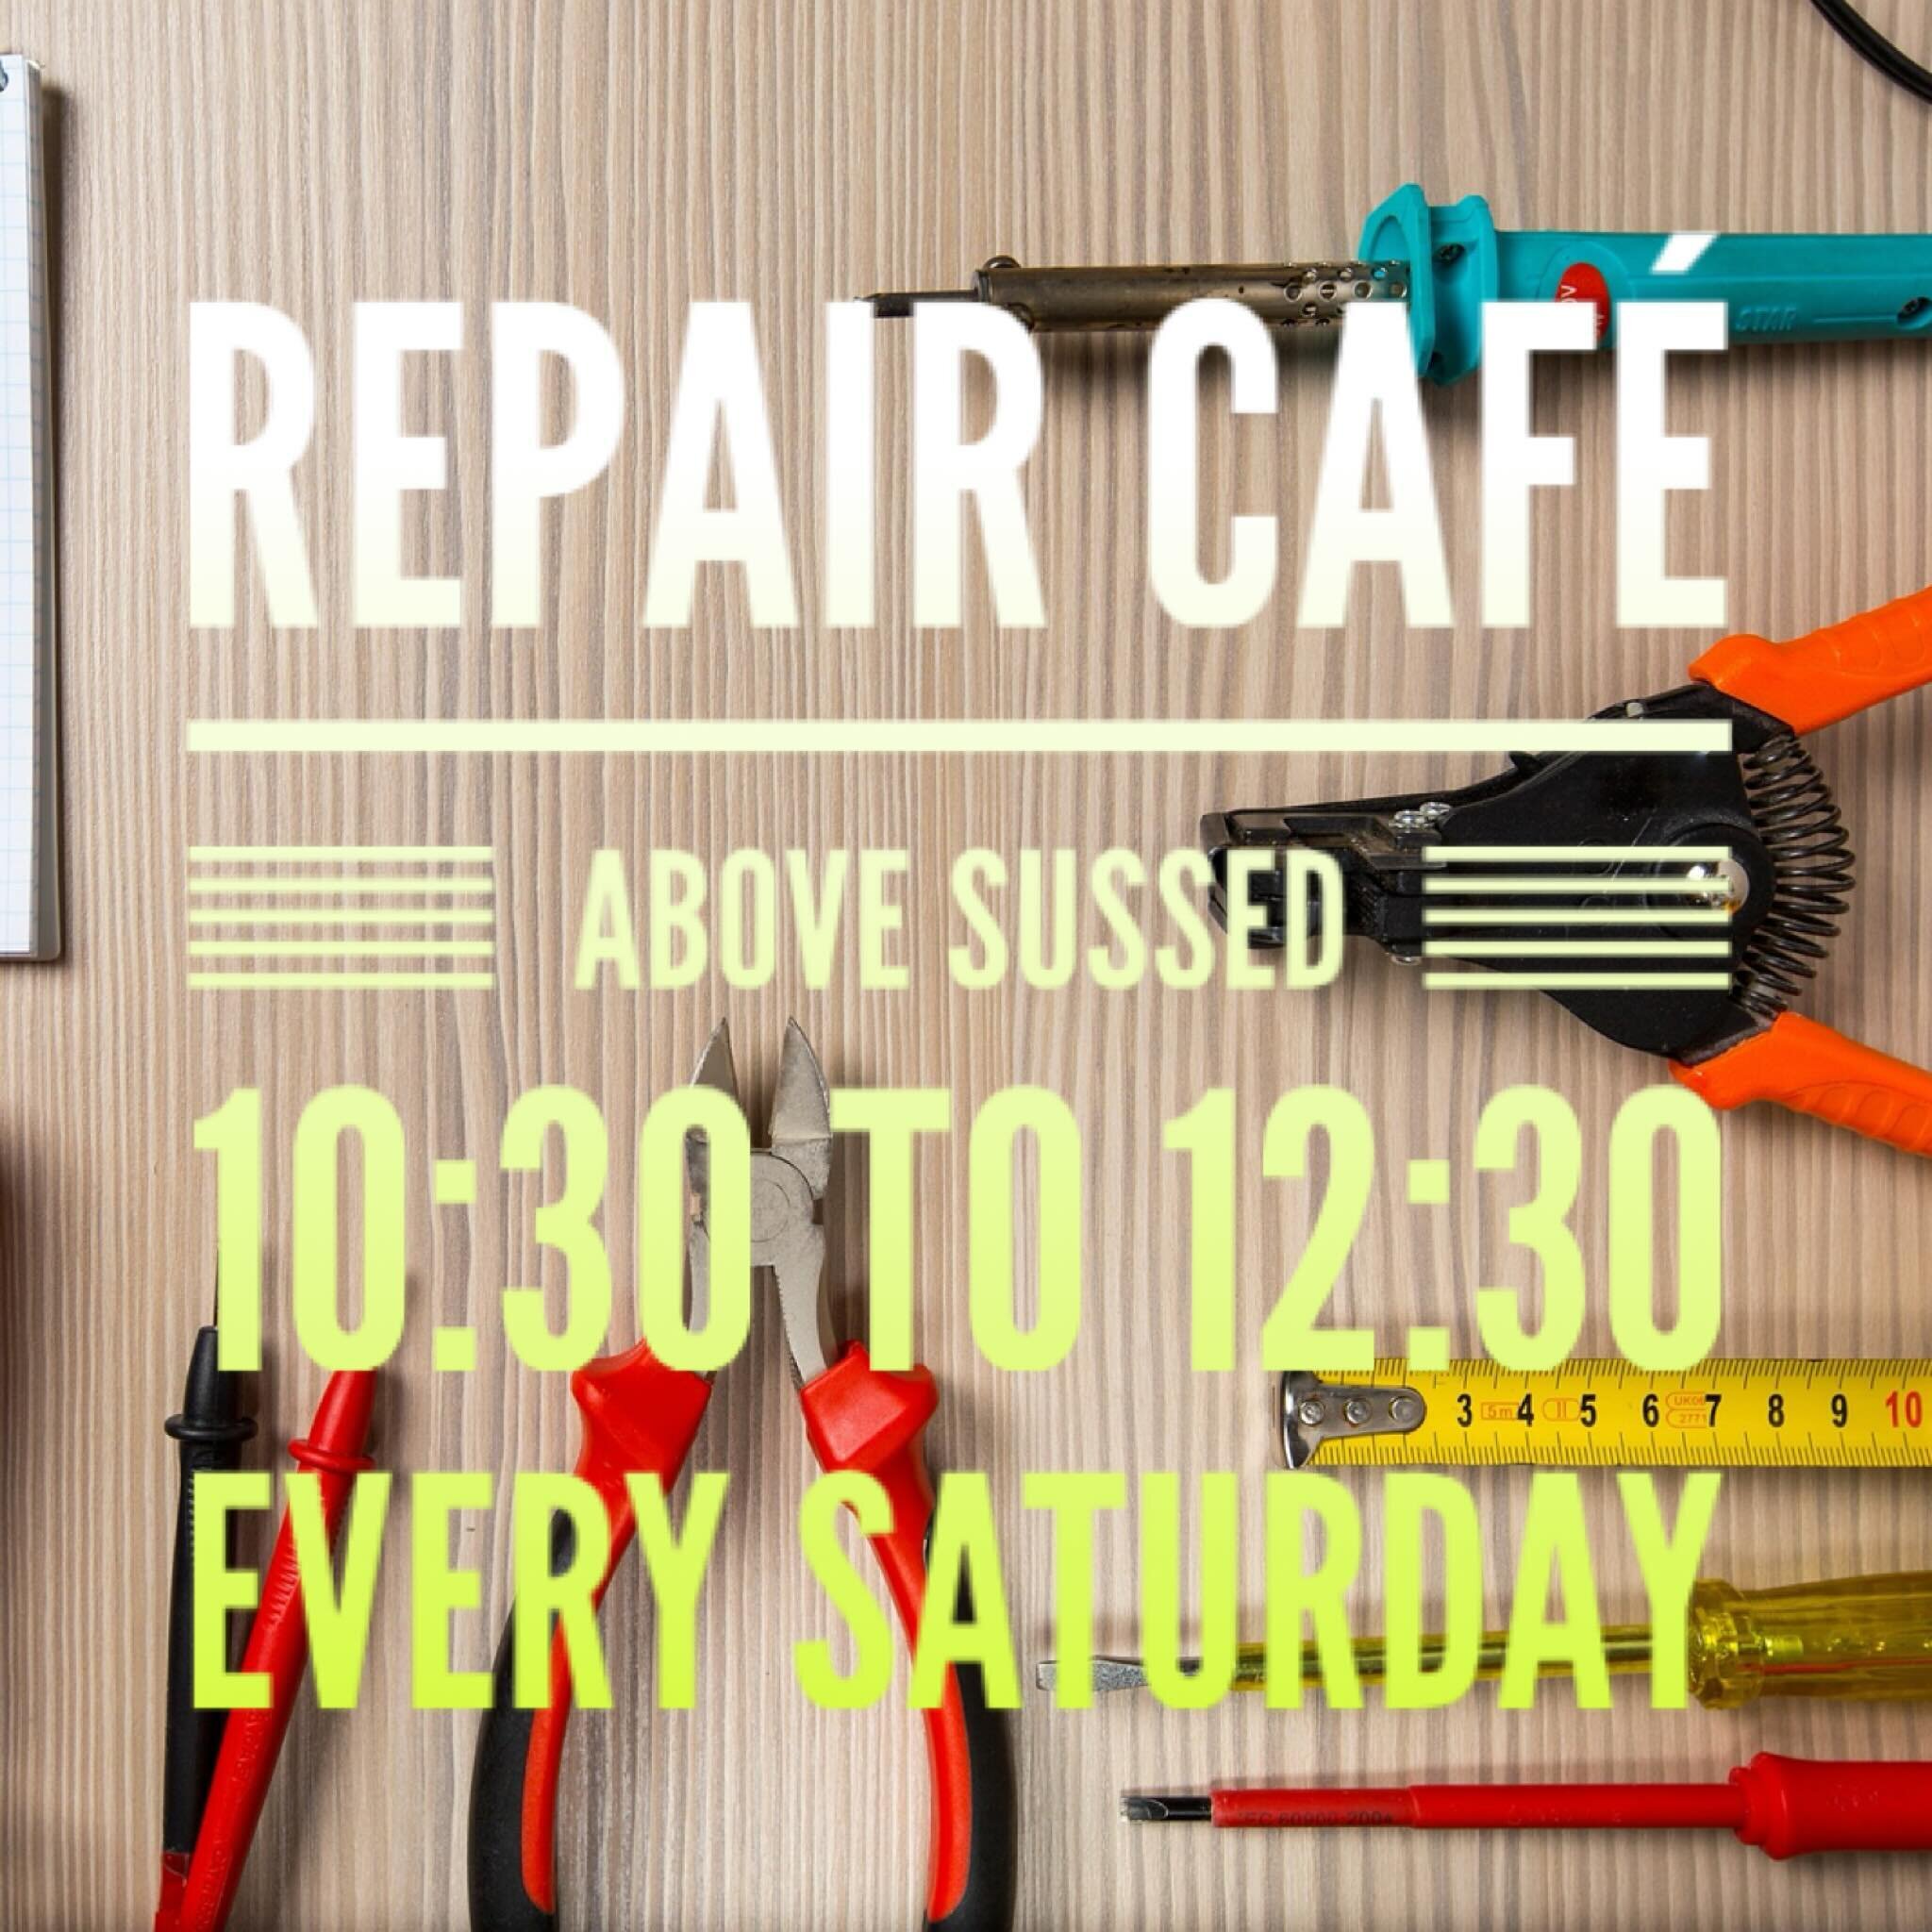 #porthcawl repair cafe is open on Saturday above SUSSED for household items needing repairs